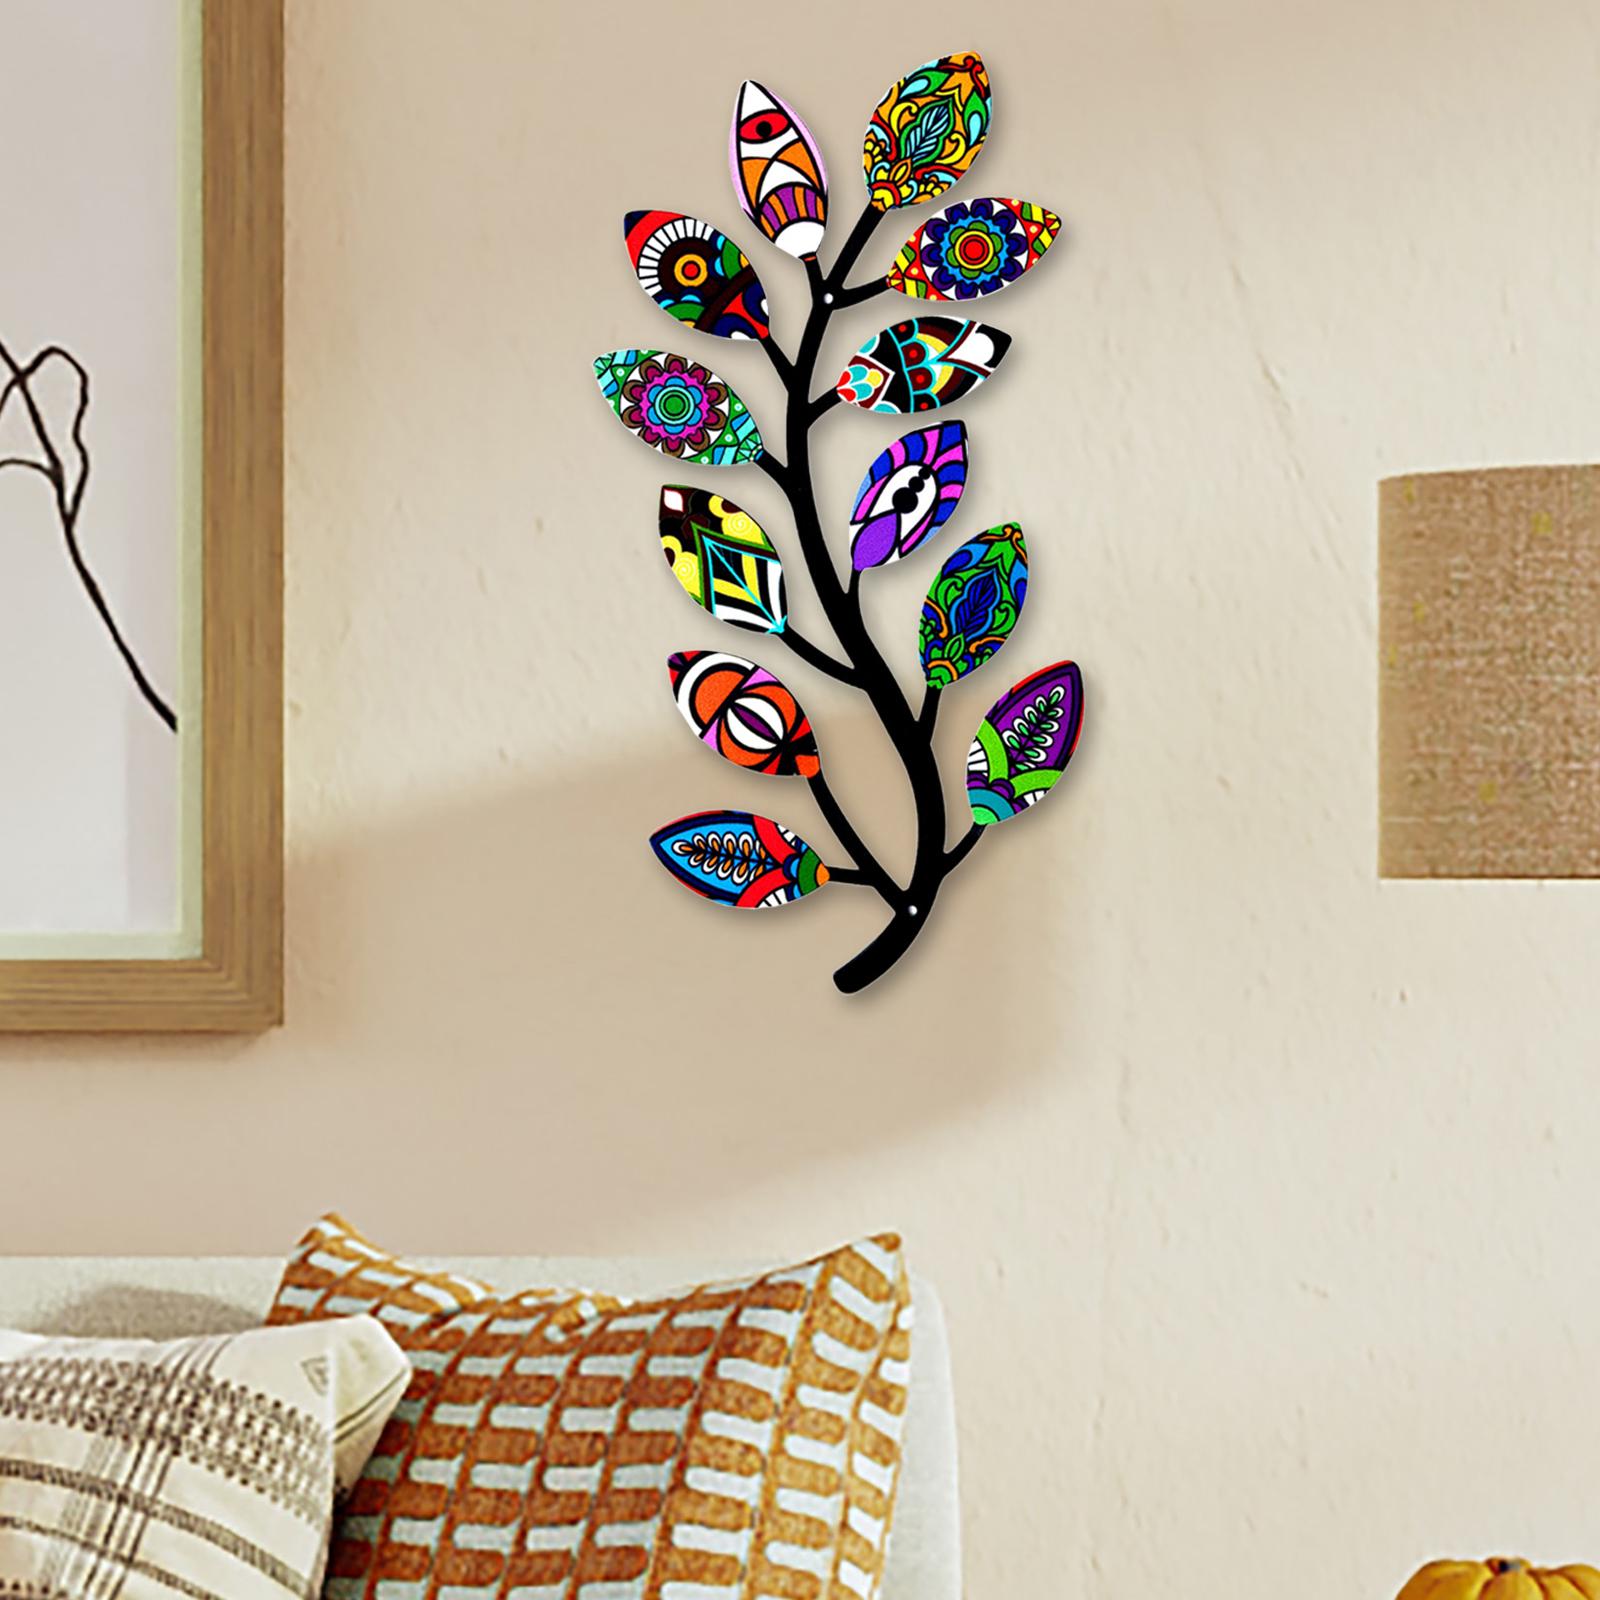 Metal Tree Branch Wall Art Decor, Wall Sculpture for Home Living Room Patio StyleA